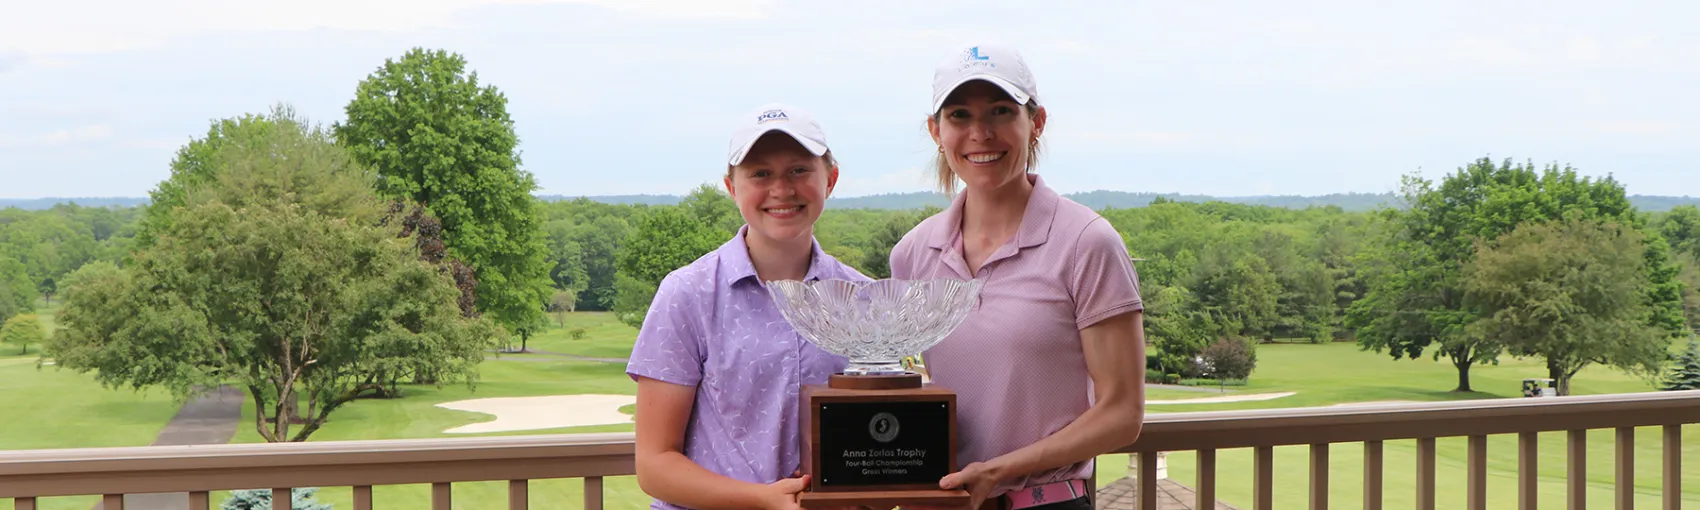 Granahan and Gaglione Claim 12th New Jersey Women’s Four-Ball Championship